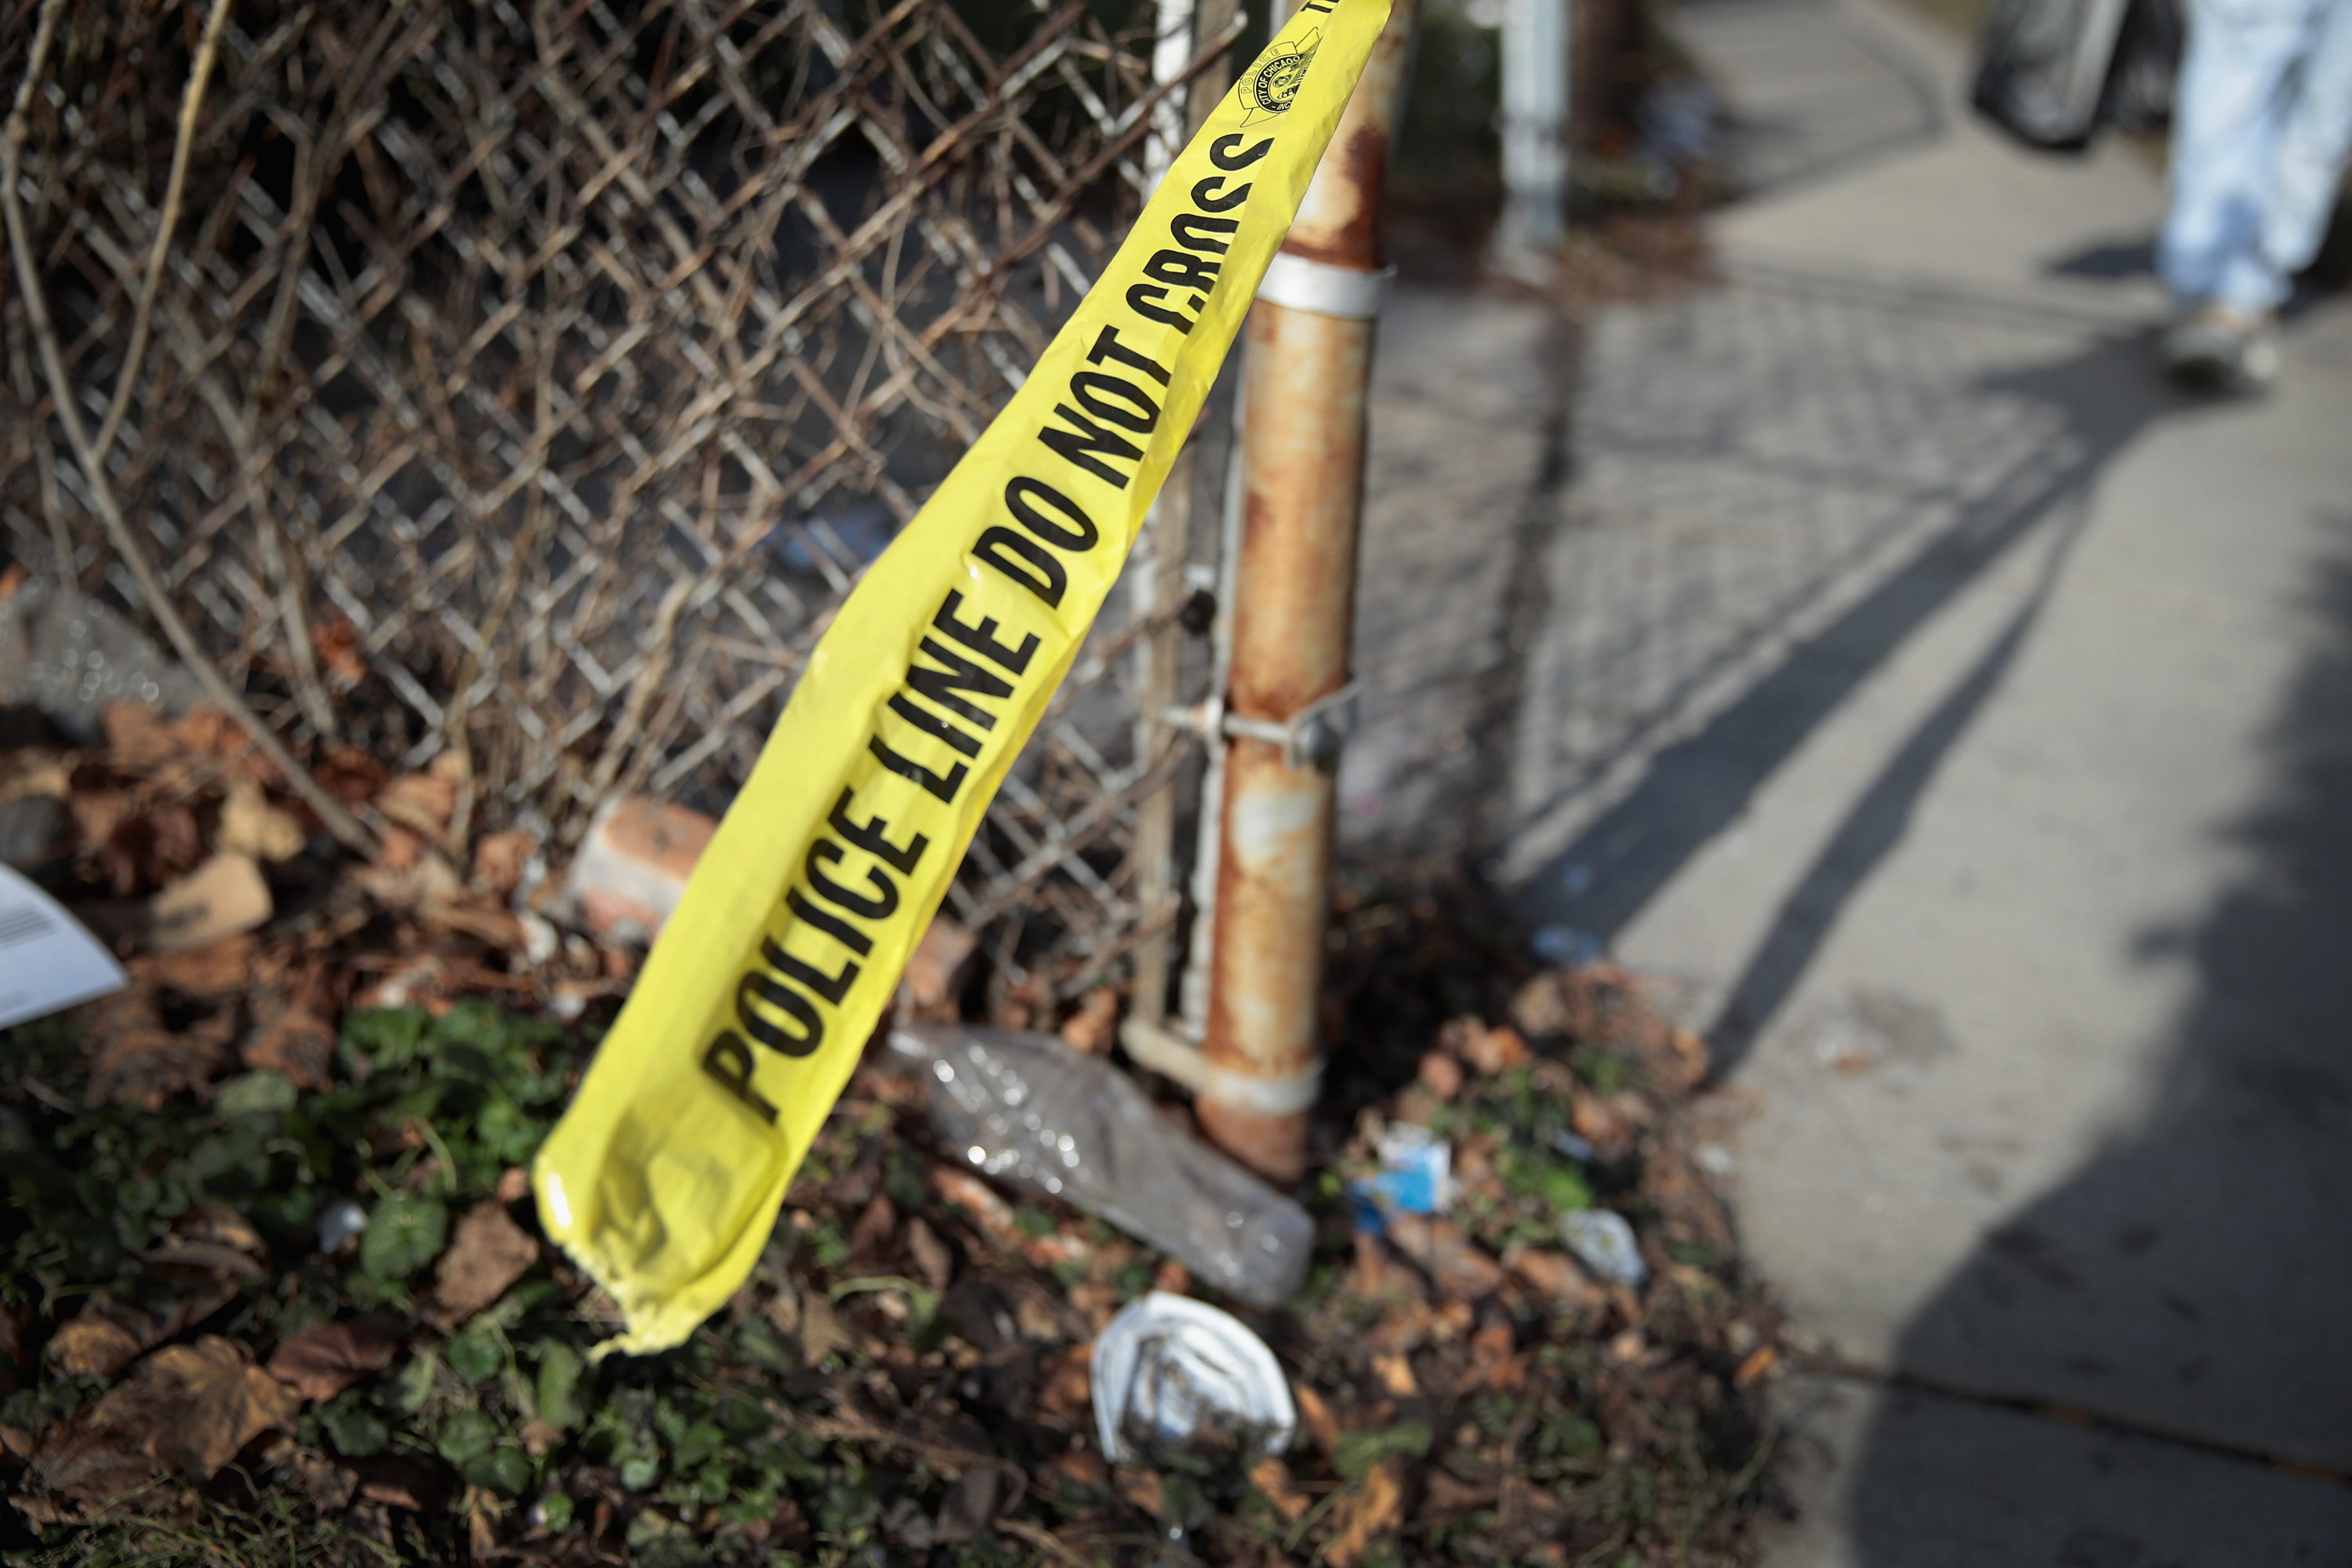 Crime scene tape clings to a fence where in Chicago, where homicides are spiking this summer.&nbsp;